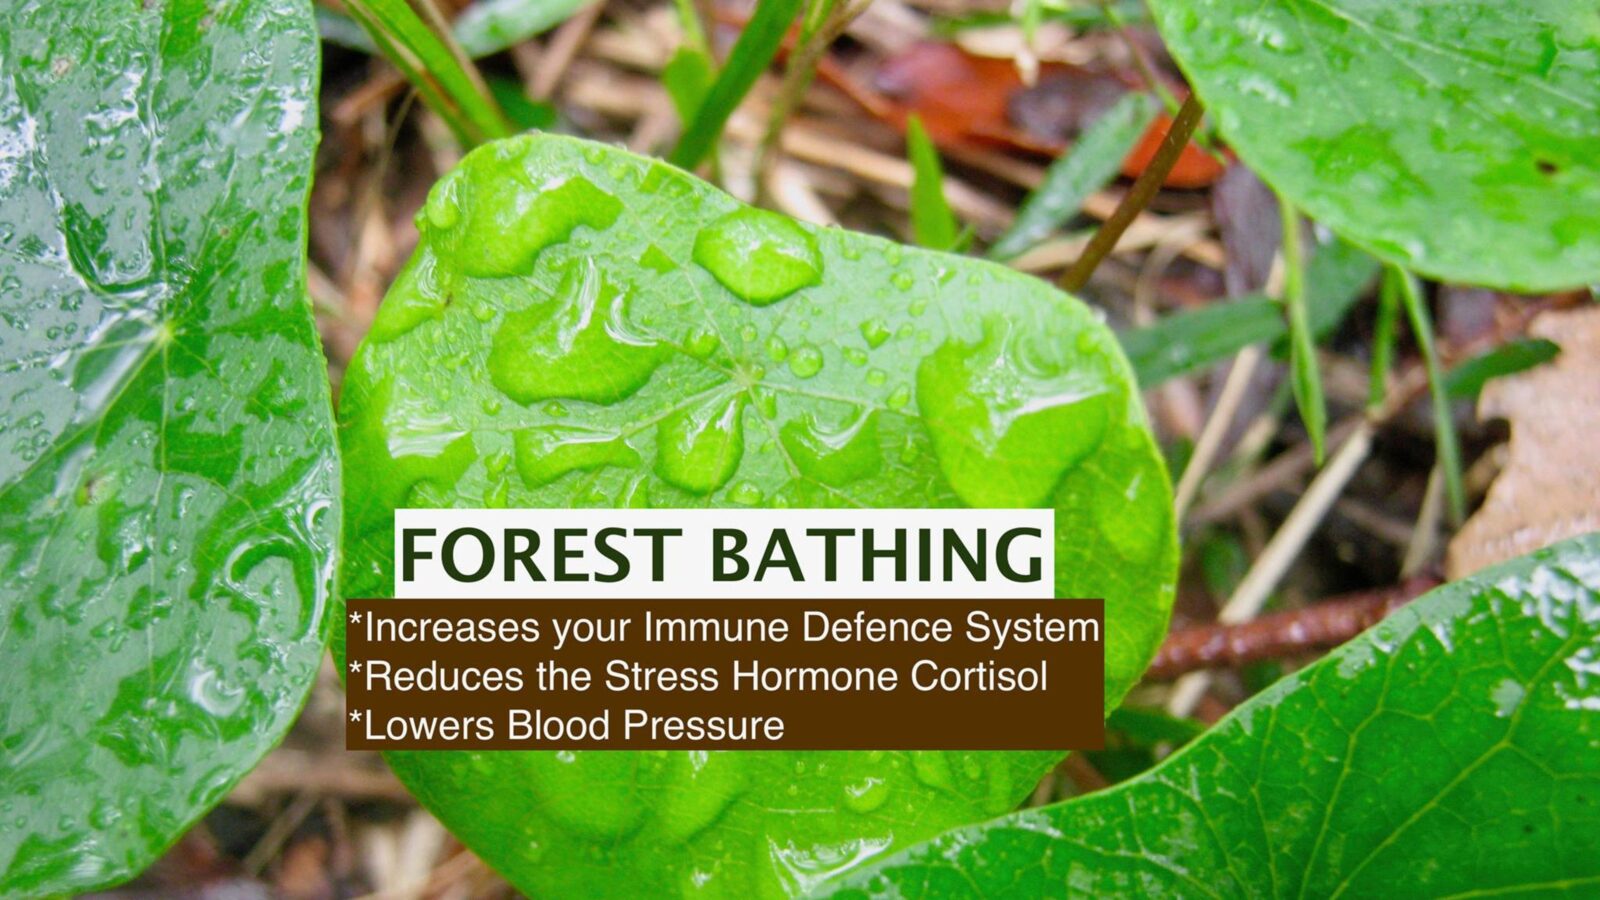 RELAX, DE-STRESS, BE FREE RECEIVE THE GIFTS OF FOREST BATHING WHILST BEING IMMERSED IN THE FOREST AT YOUR CAMPING SITE.